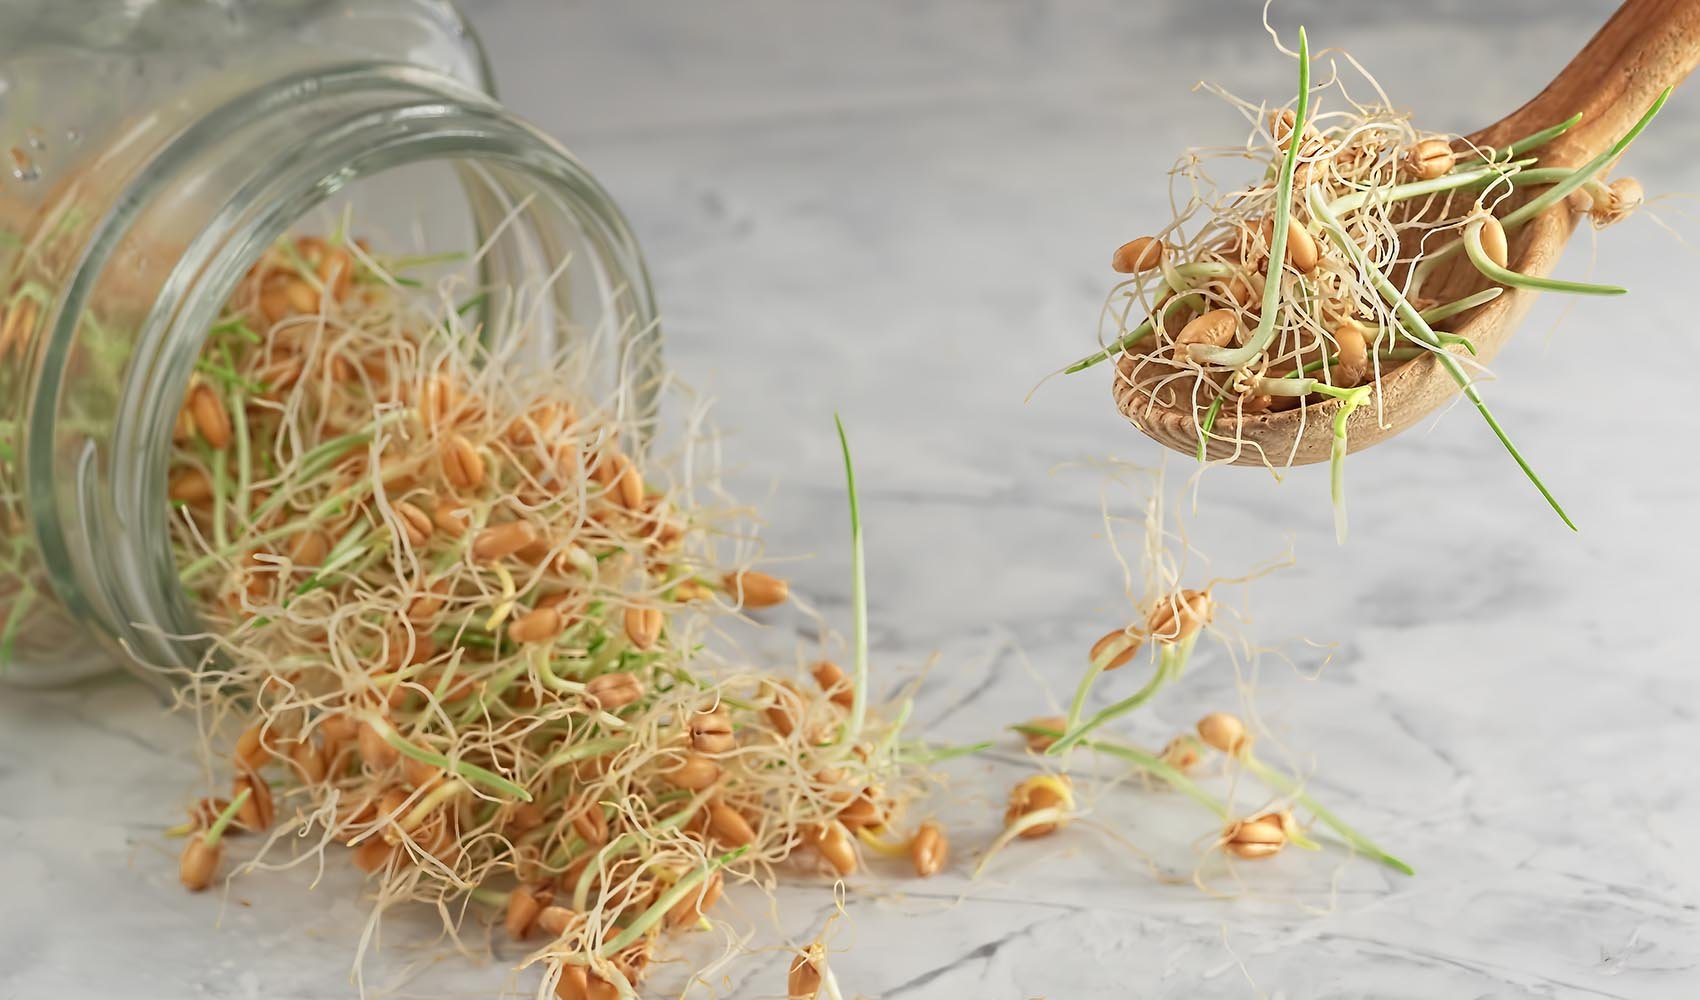 wheat-sprouts-health-benefits-and-how-to-grow-them